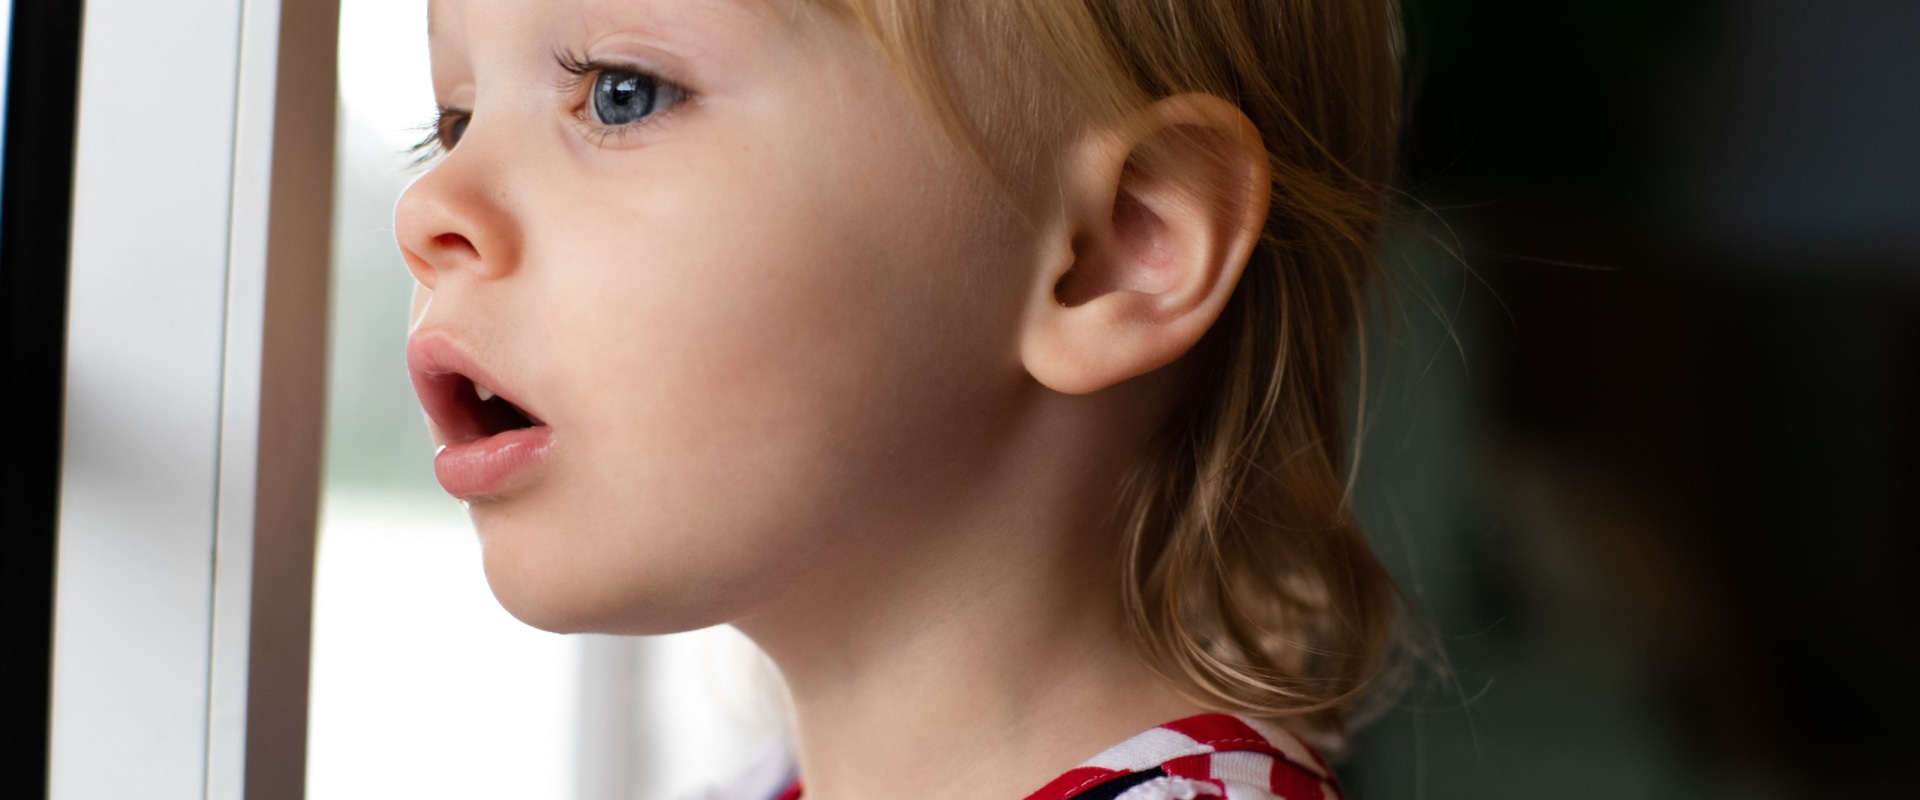 What are common speech disorders in childhood?